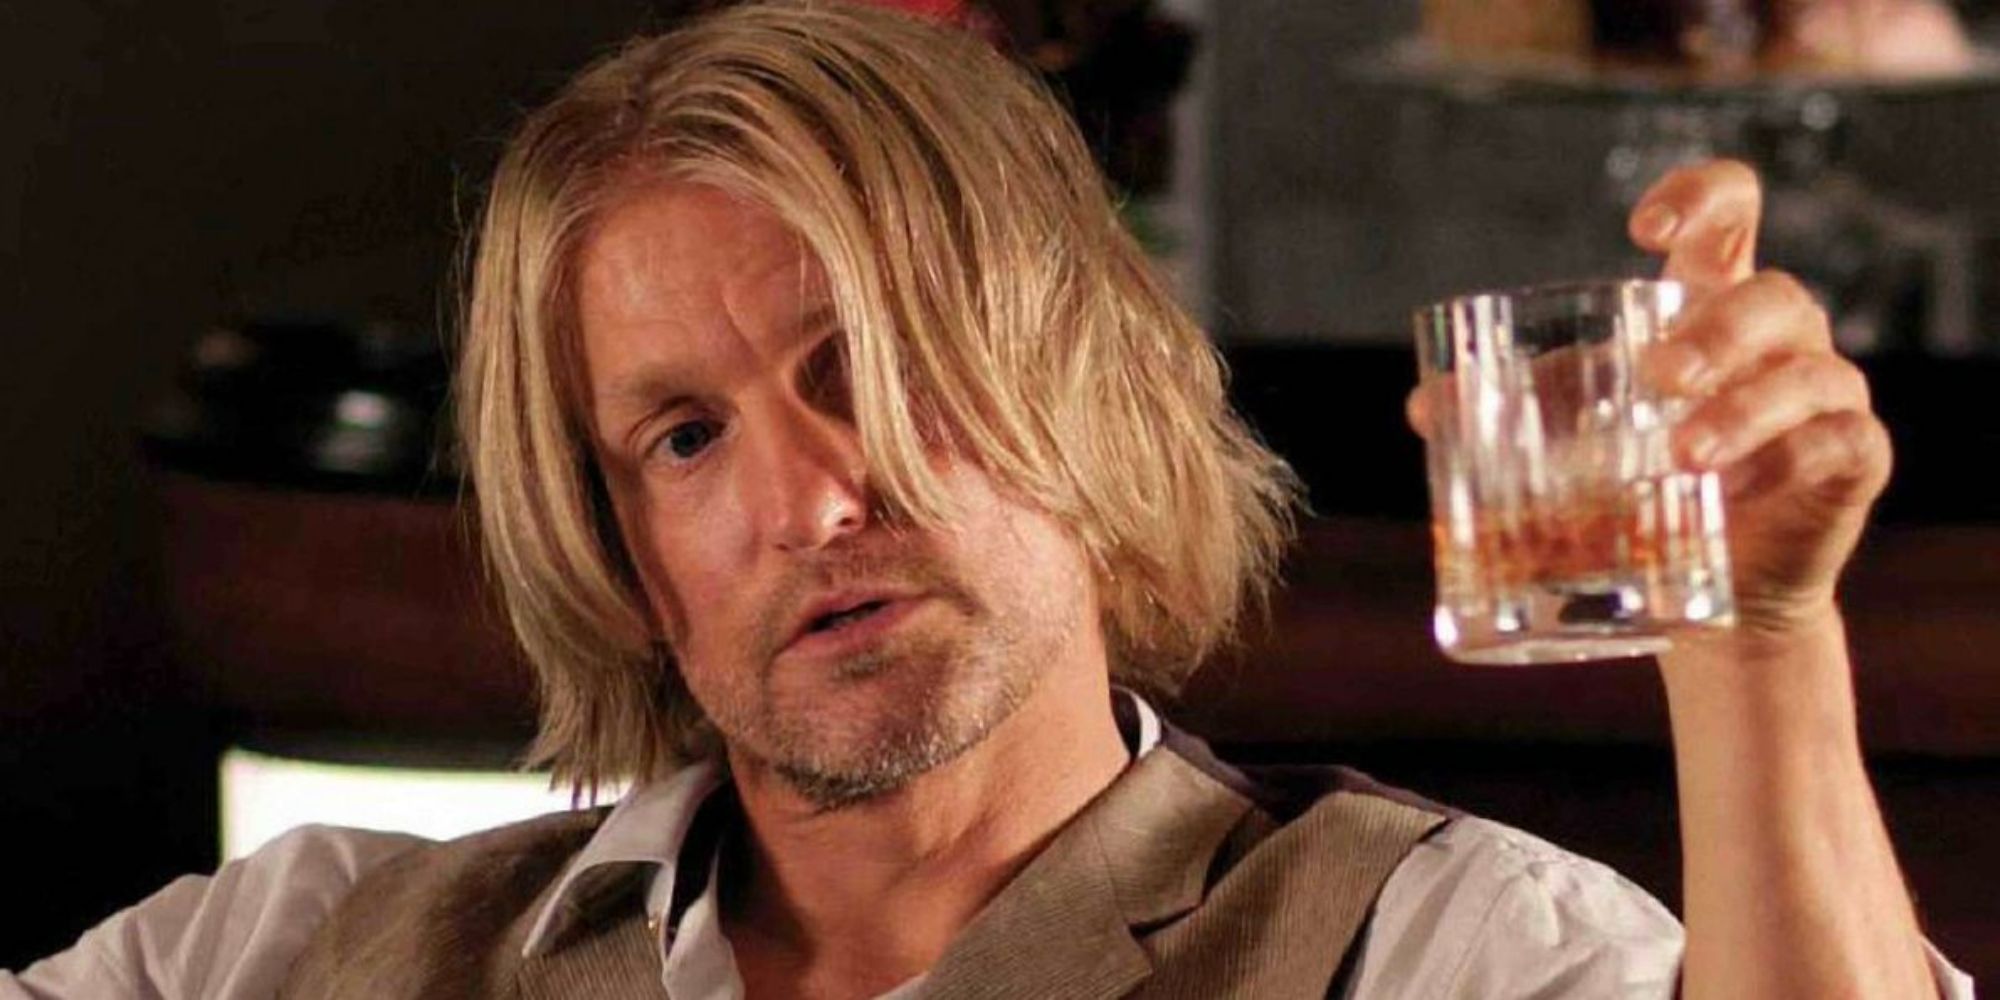 Woody Harrelson as Haymitch holding a glass of alcohol in The Hunger Games